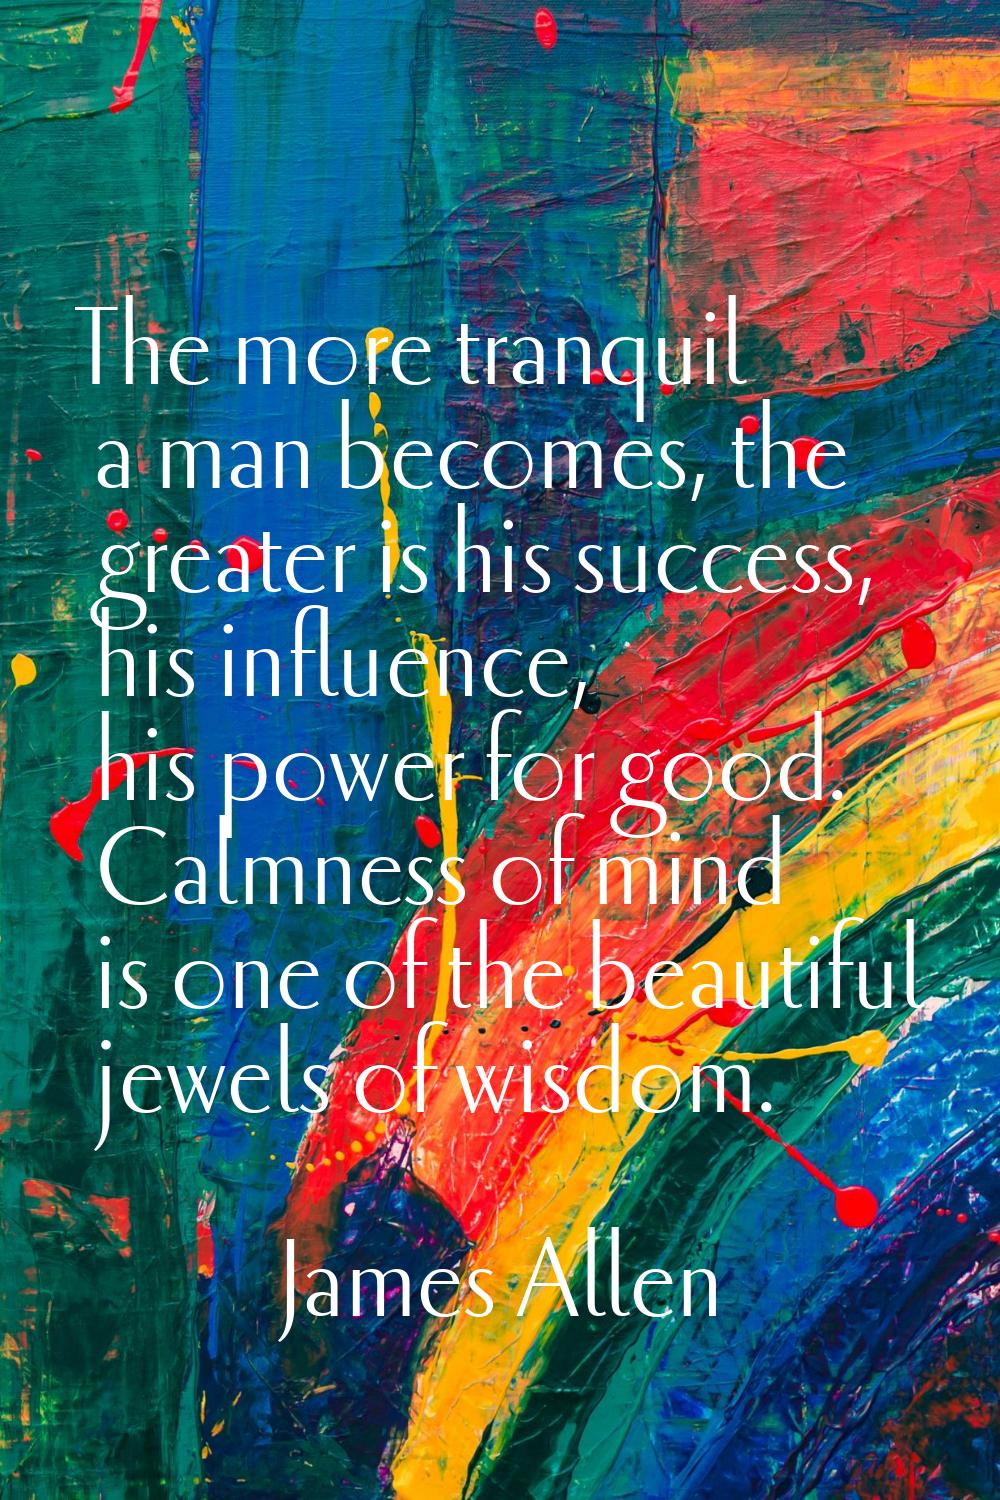 The more tranquil a man becomes, the greater is his success, his influence, his power for good. Cal